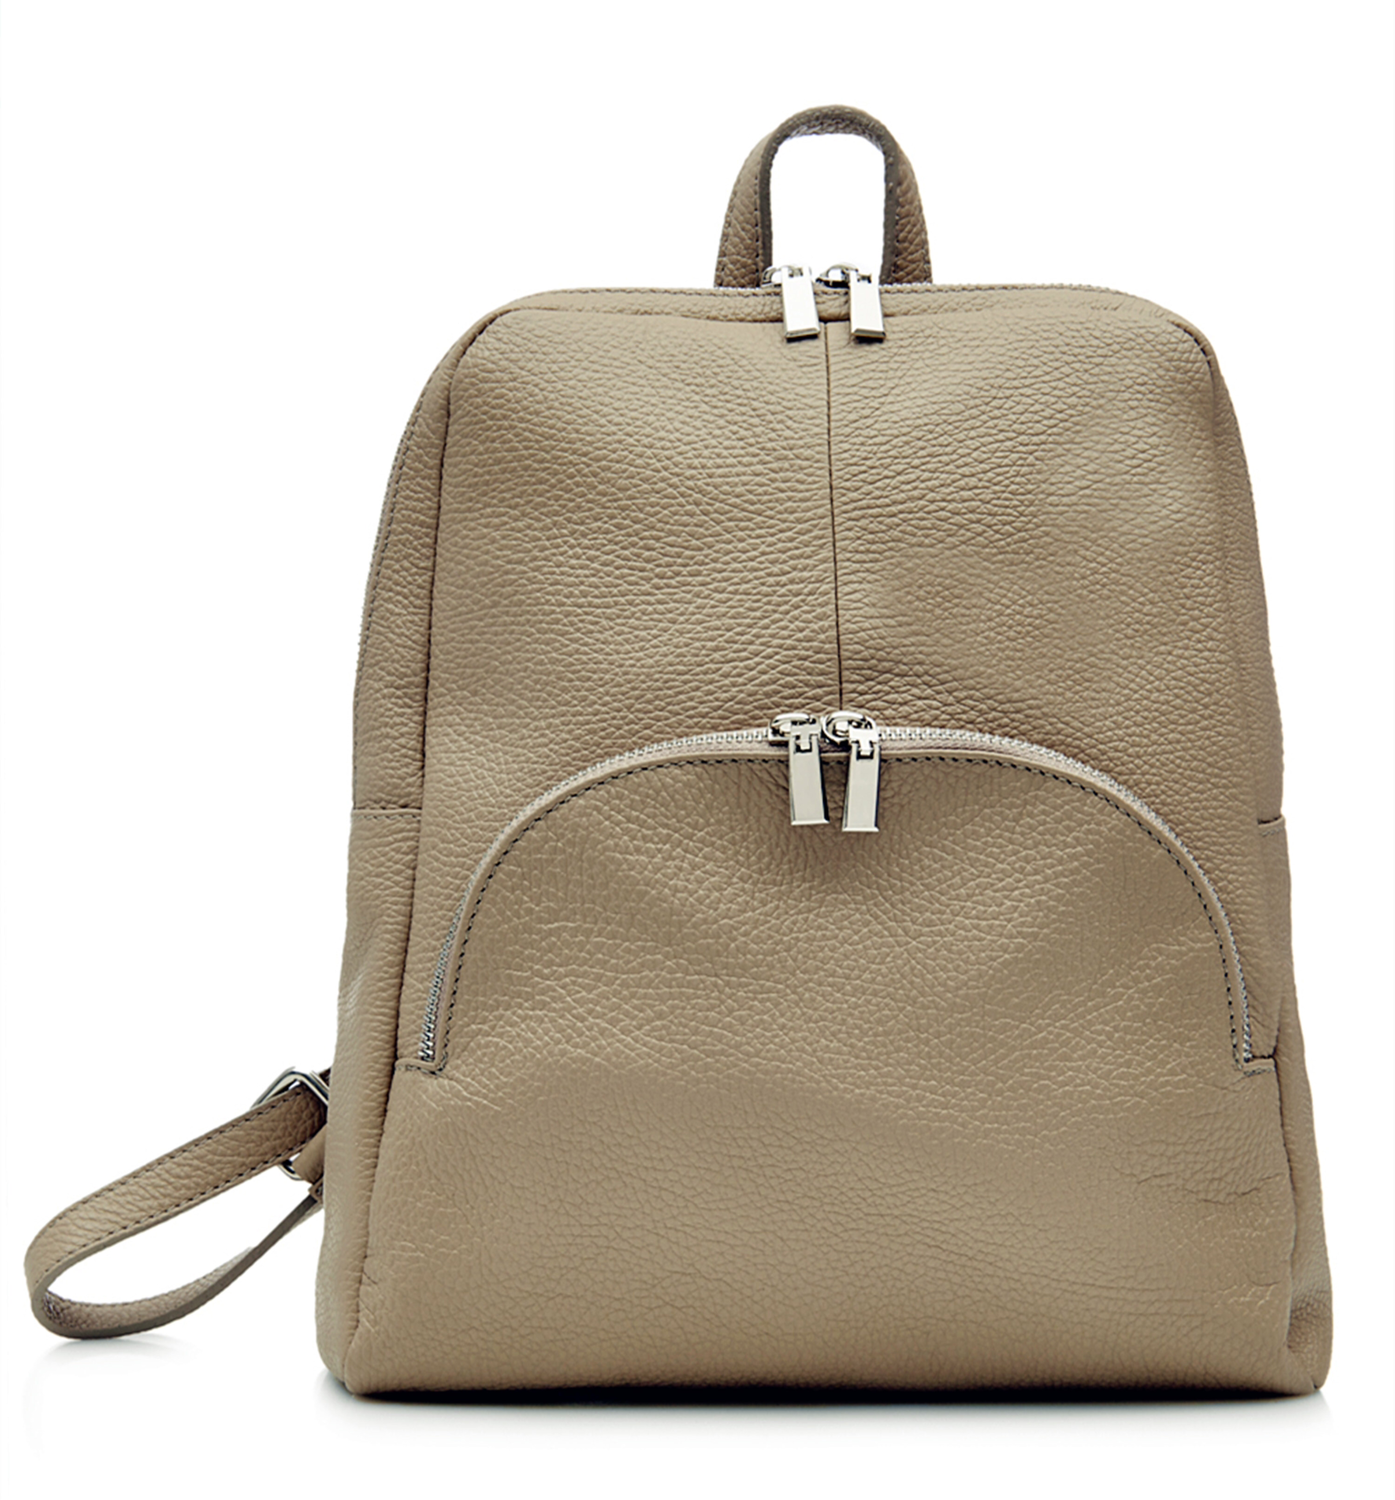 Light Taupe Textured Leather Backpack 